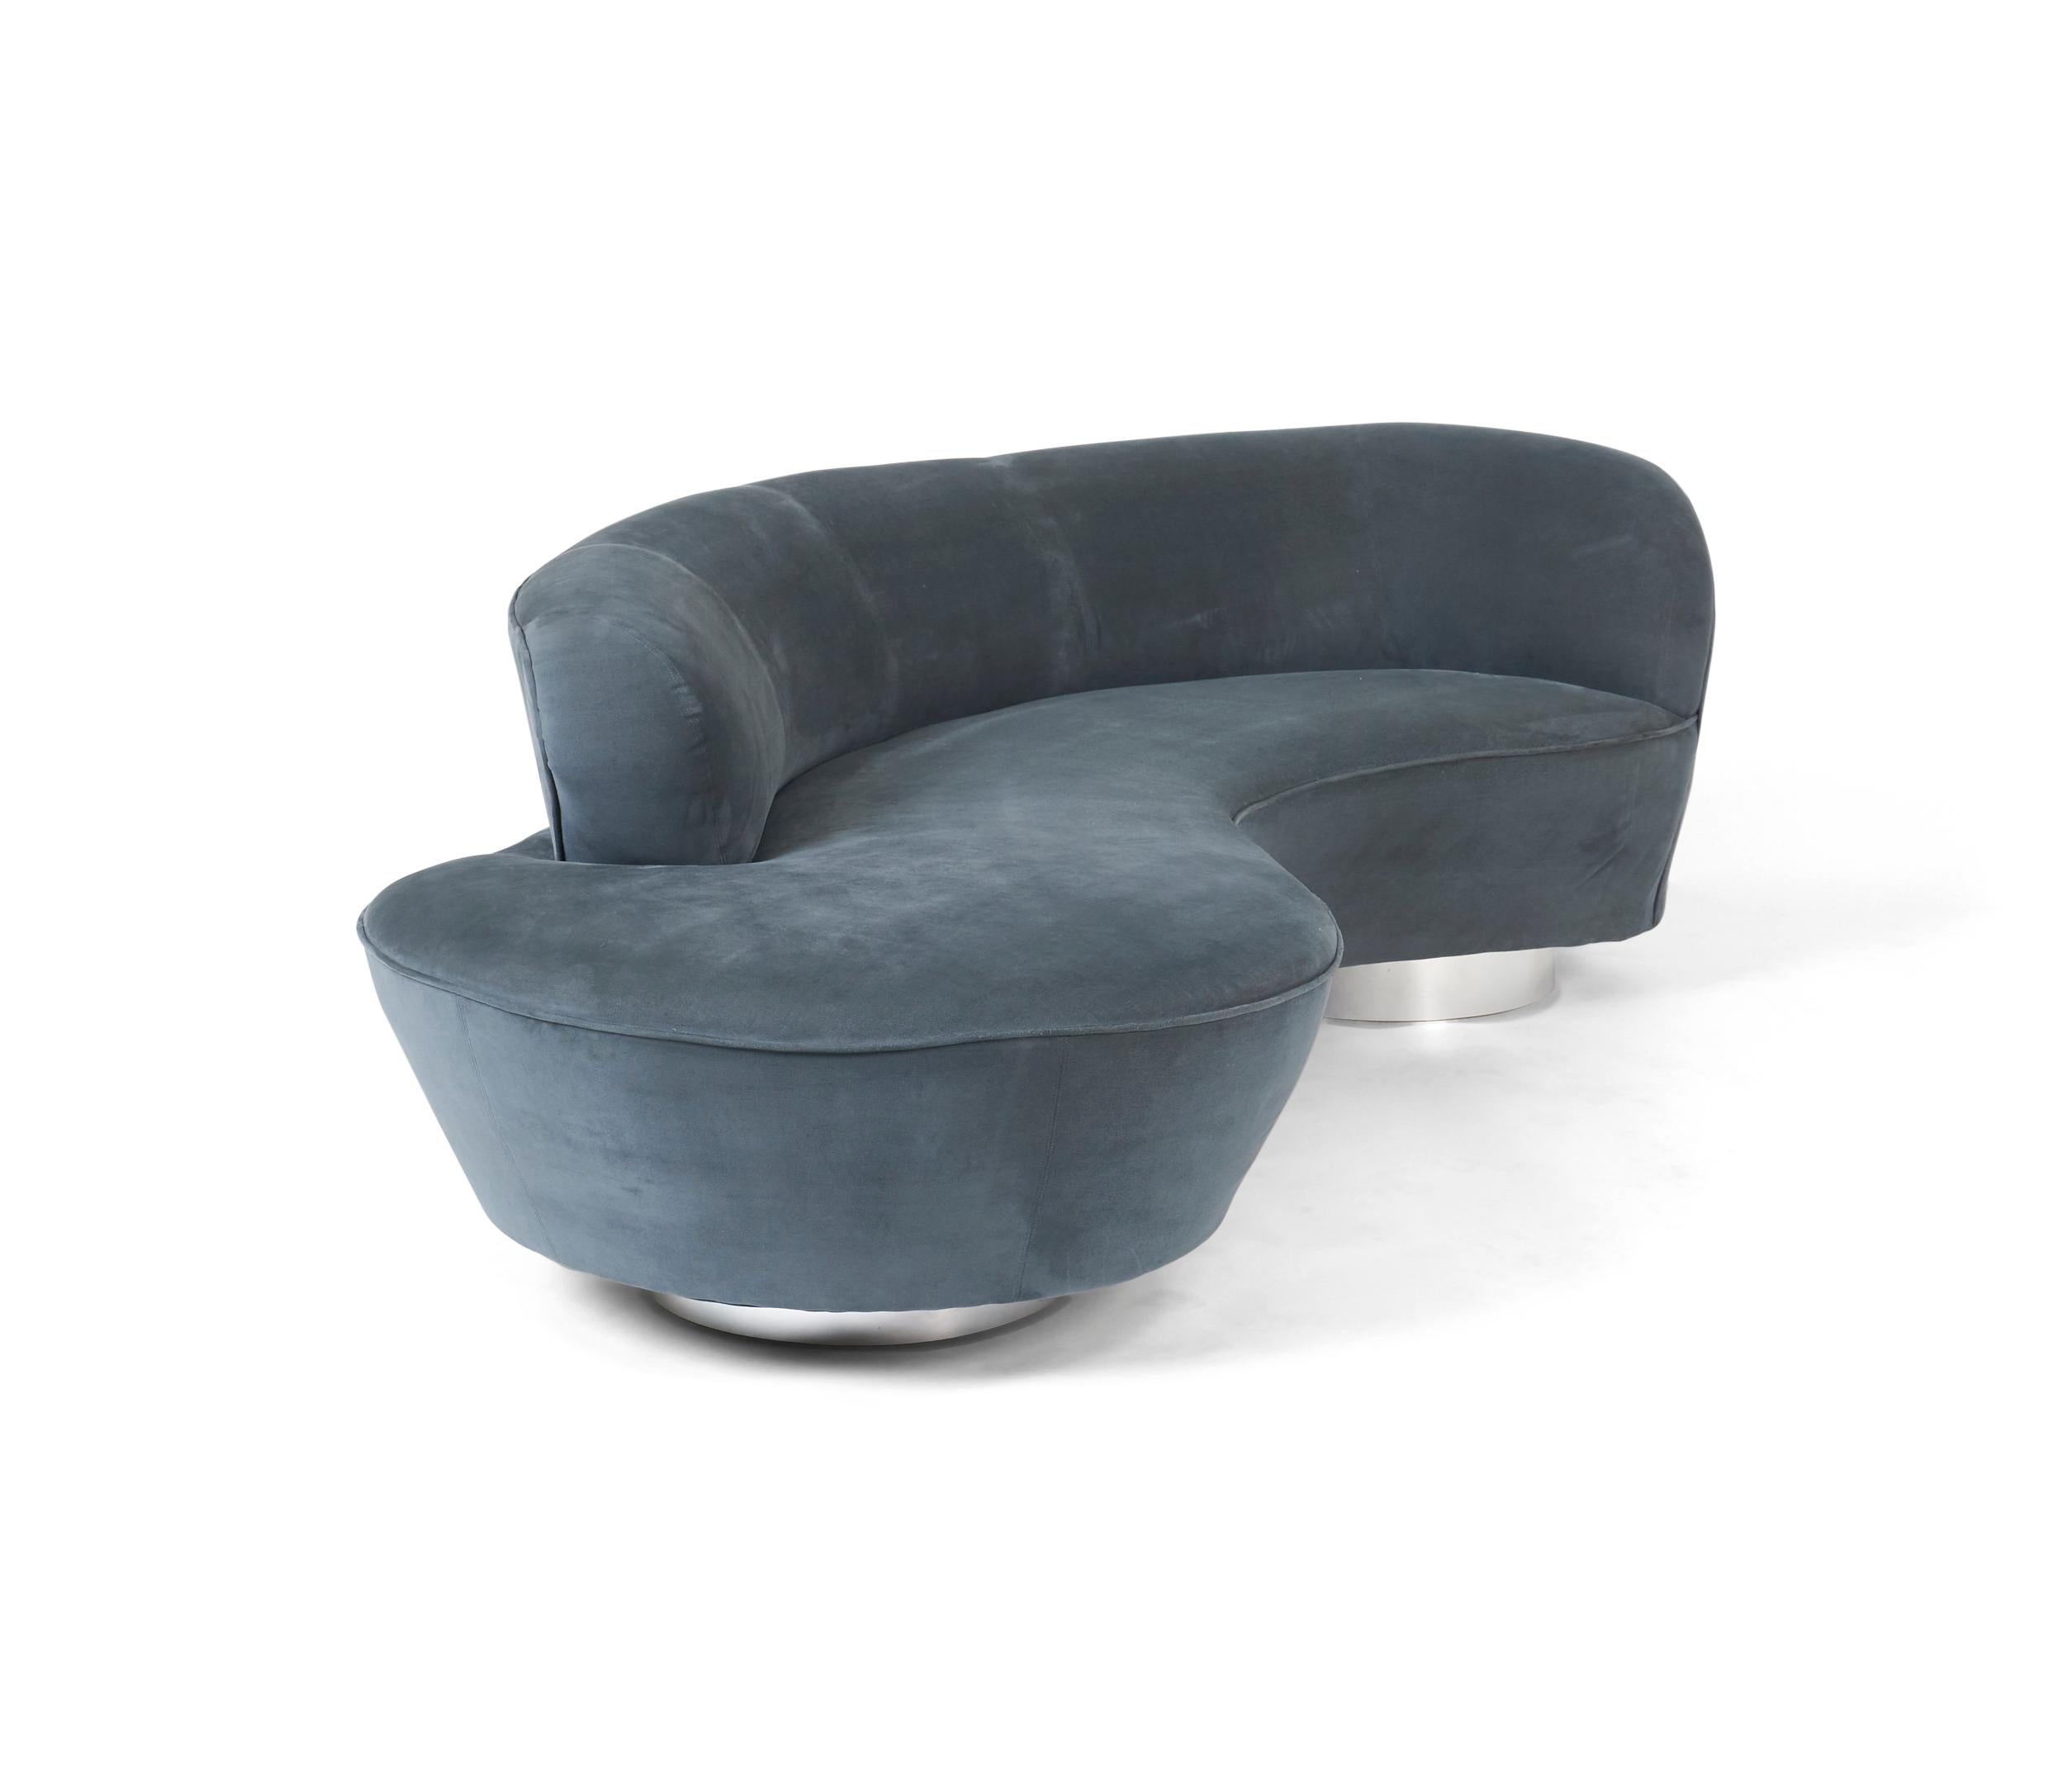 Cloud sofa by Vladimir Kagan for Directional Furniture. Original blue-grey suede leather upholstery with chrome bases.